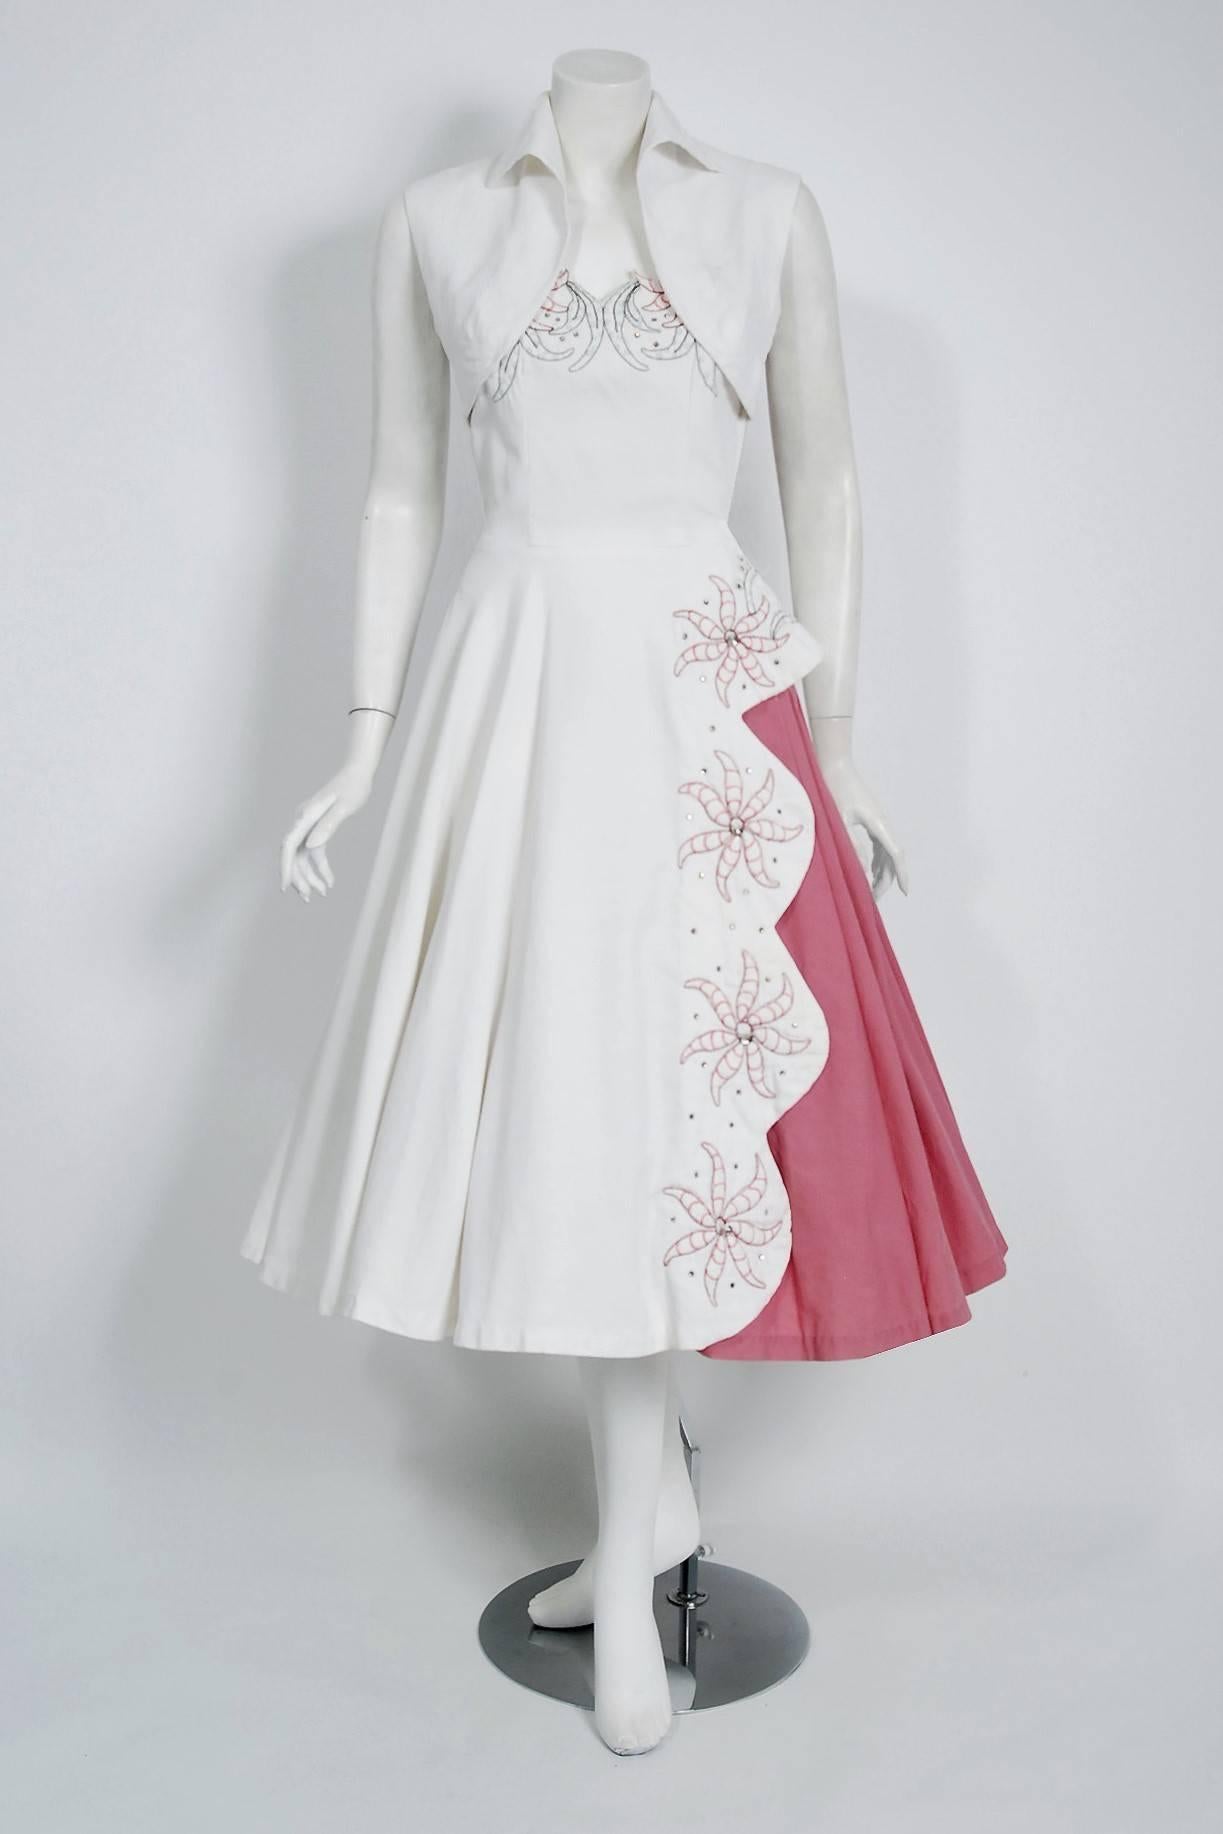 An exceptional and breathtaking 1950's sundress ensemble by Miami Casuals. The fabric is a gorgeous textured white cotton-pique with floral embroidery in shades of pink and green. The large scale flowers are actually 3-dimensional; padded from